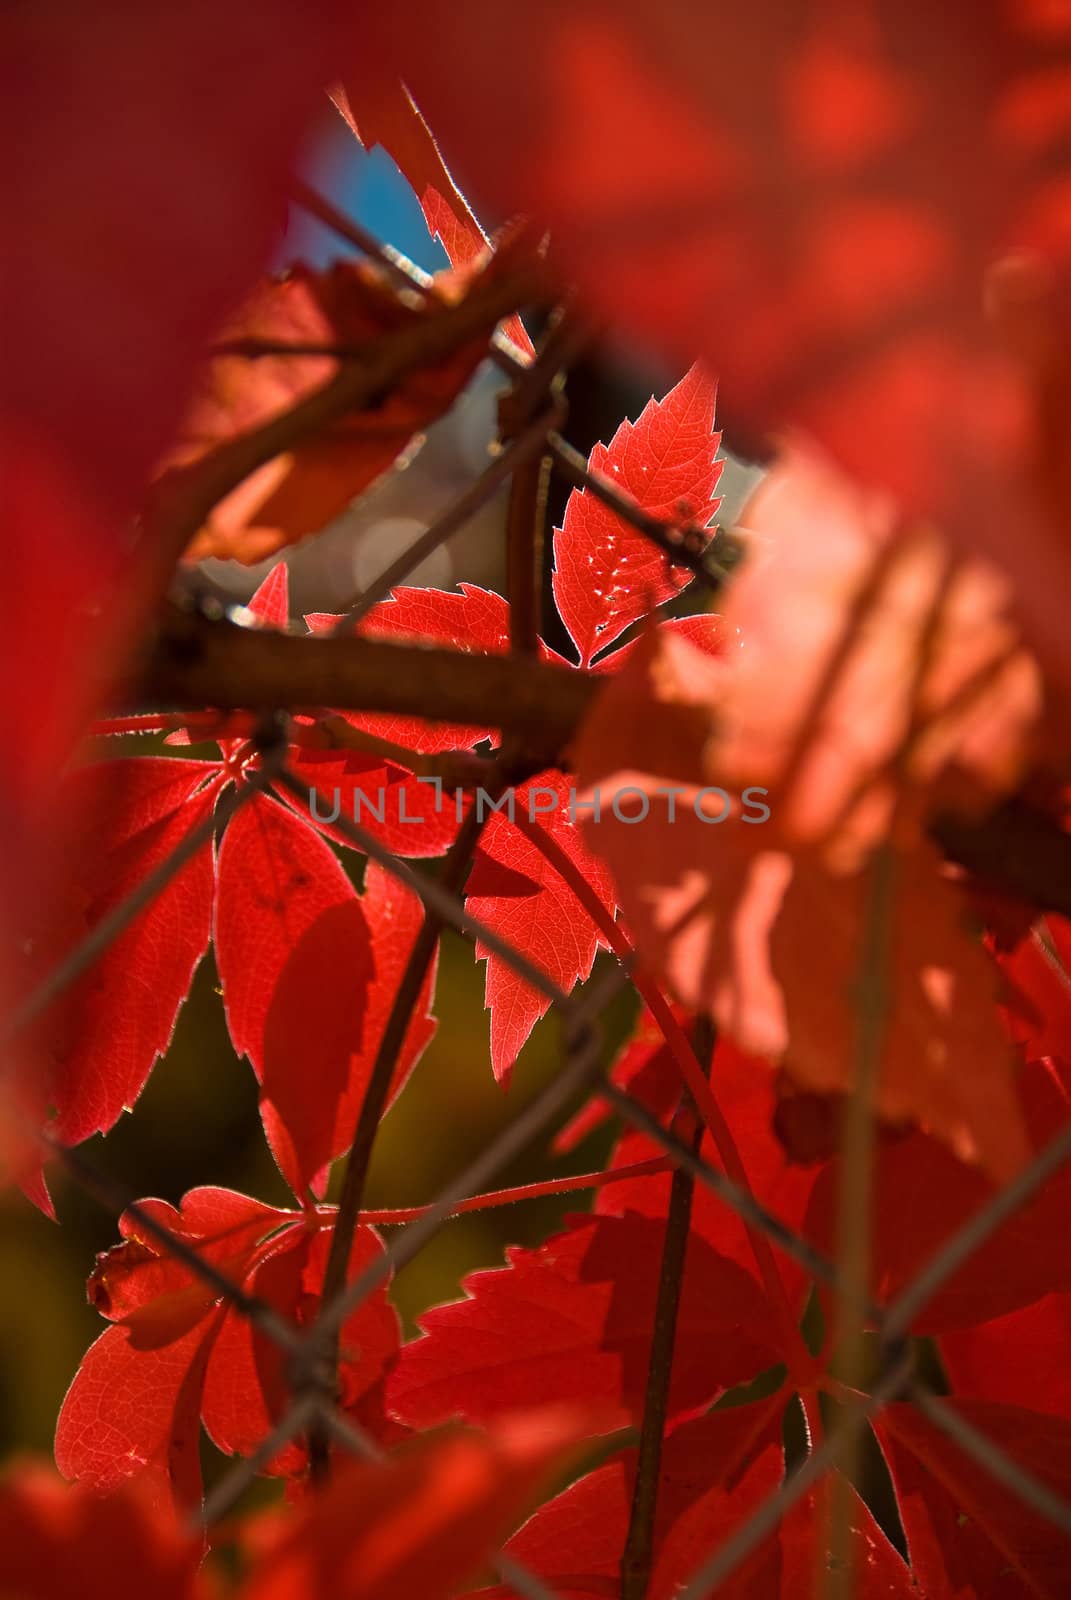 Some red autumn leafs